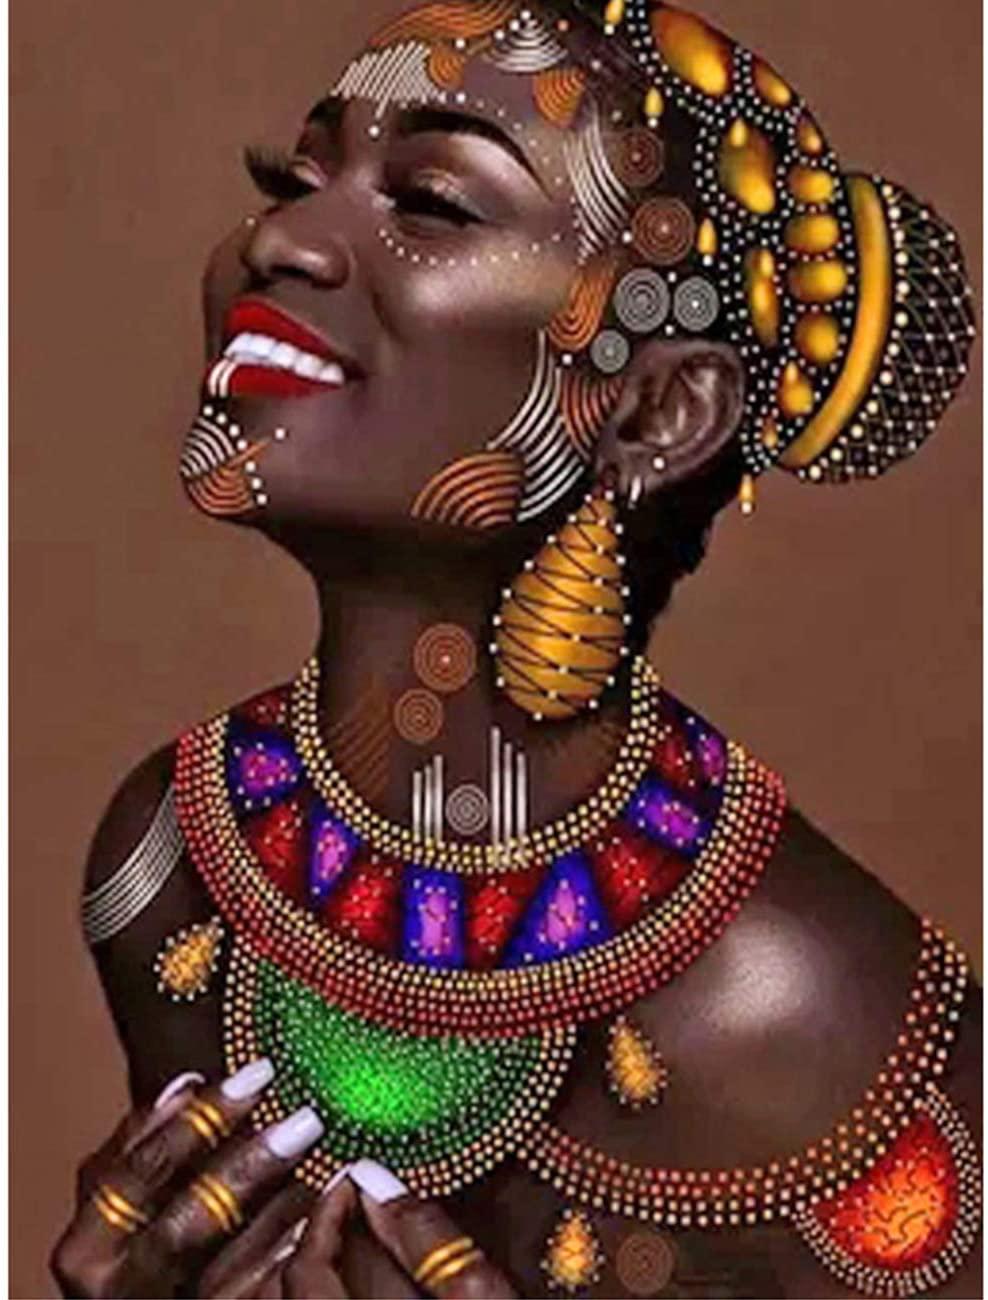 Bimkole 5D Diamond Painting Black Smiling African Woman Full Drill DIY Rhinestone Pasted with Diamond Set Arts Craft Decorations (12x16inch)